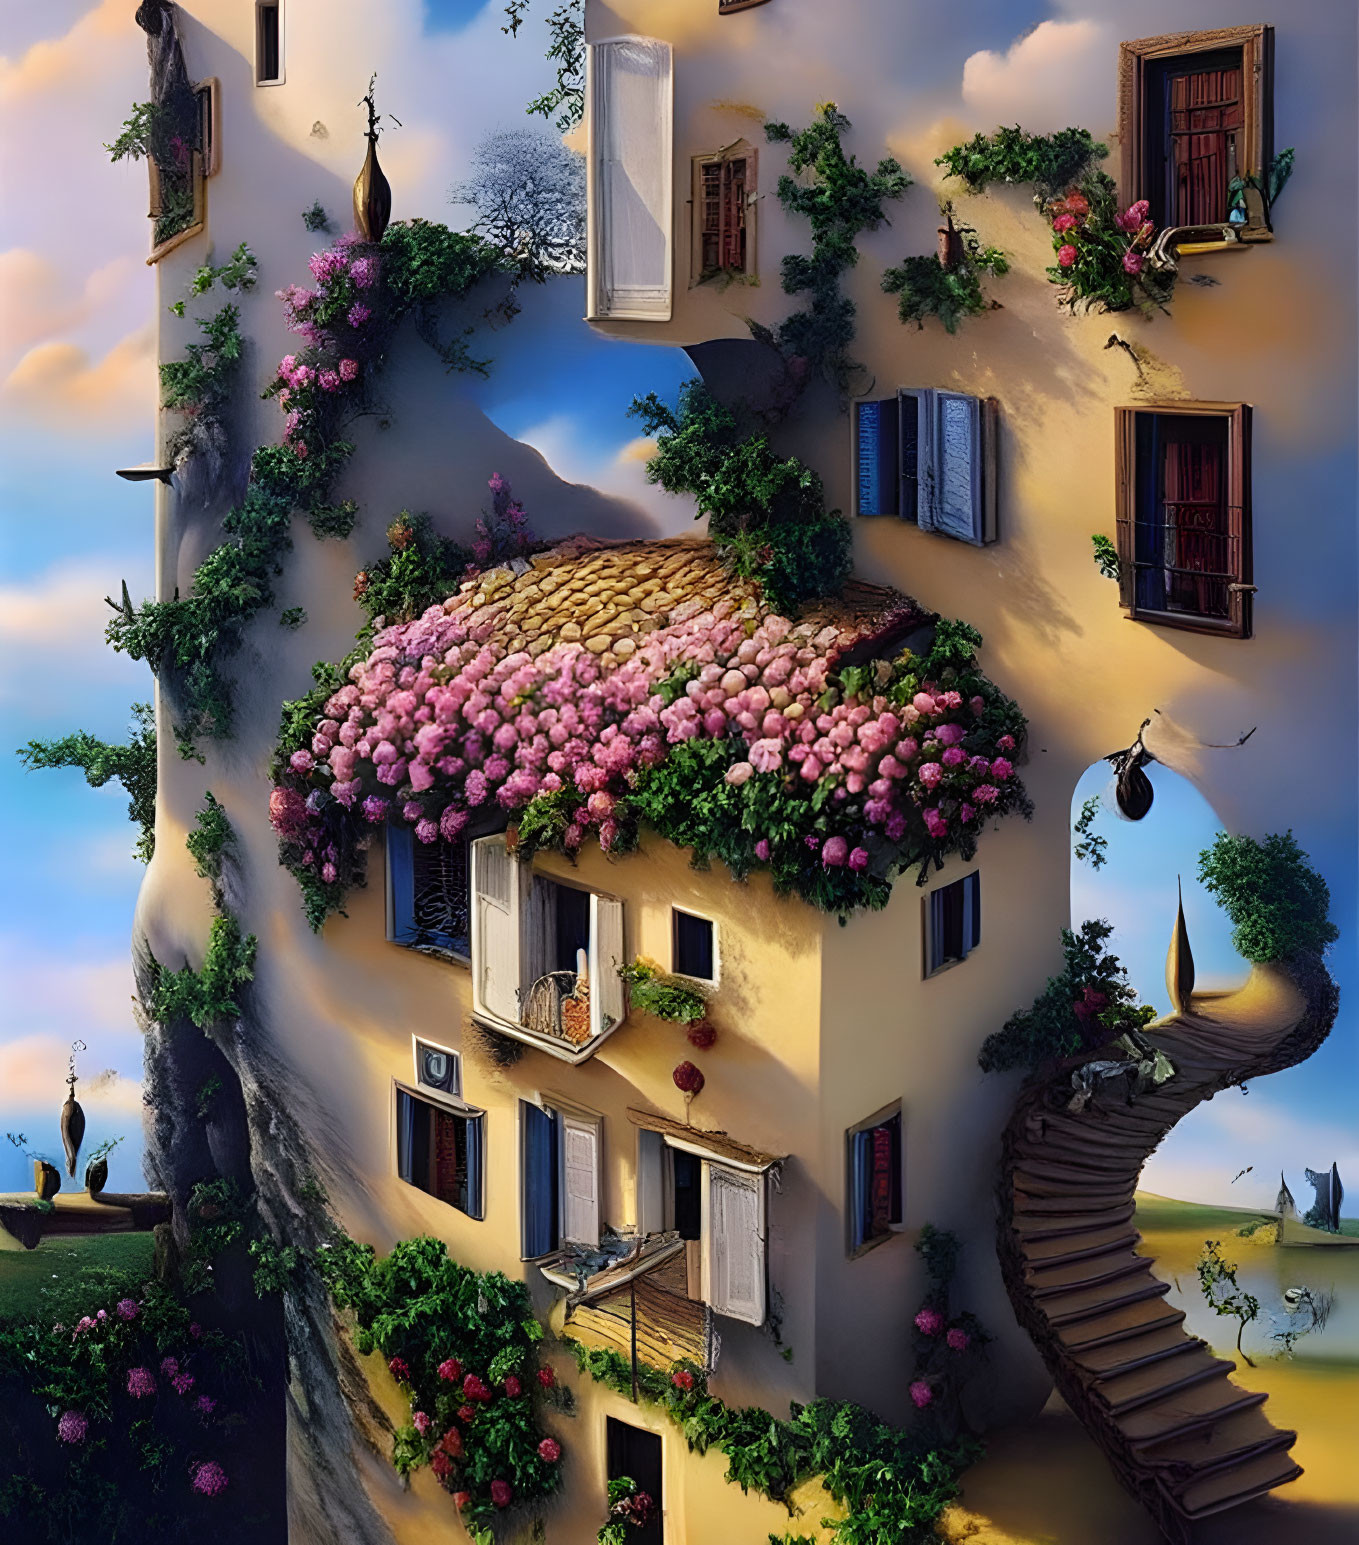 Surreal circular building with flowers and floating elements